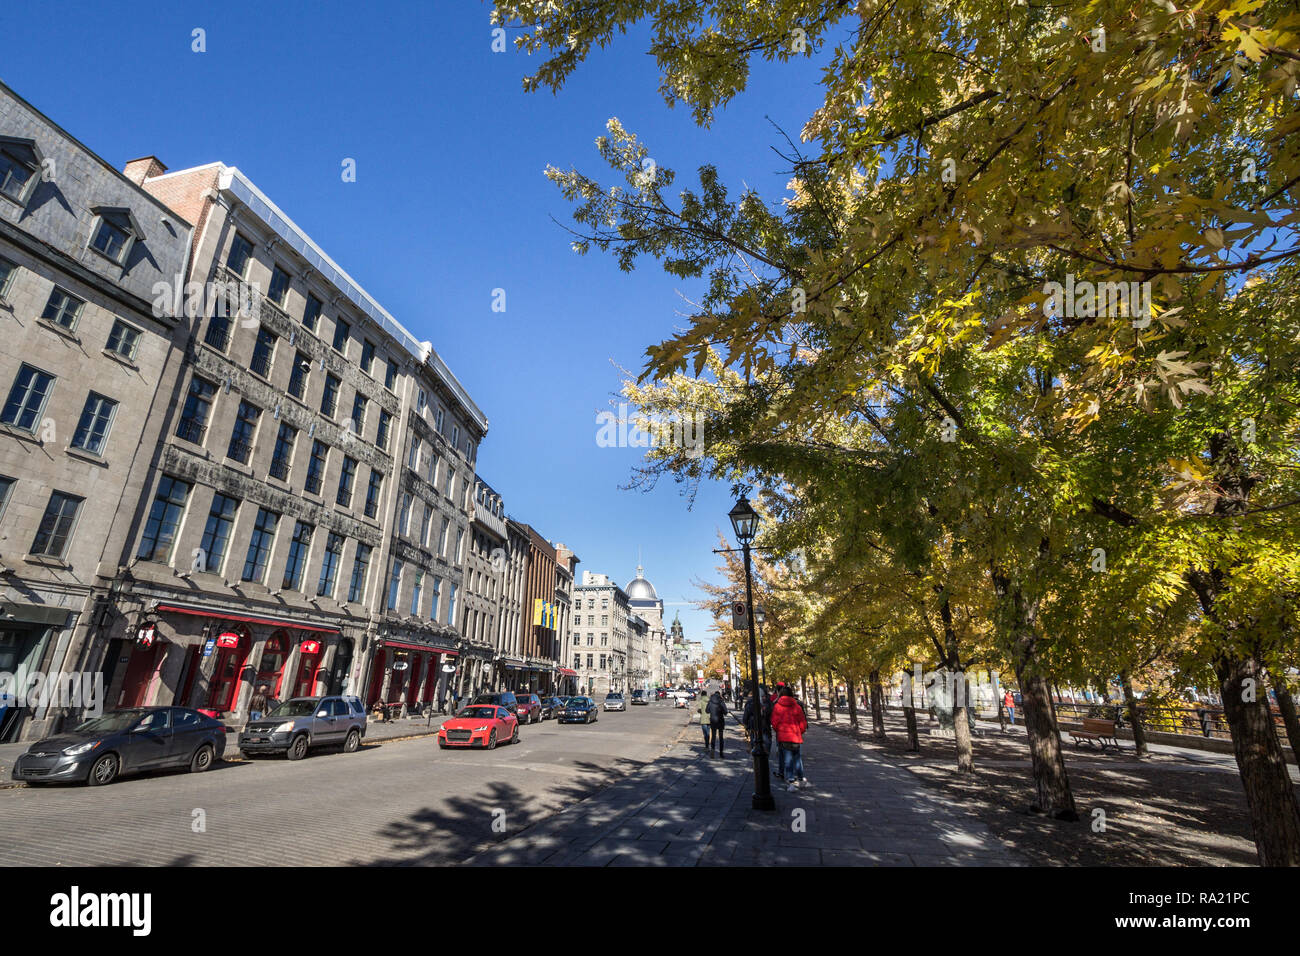 MONTREAL, CANADA - NOVEMBER 4, 2018: View of Old Montreal seafront, or Vieux Montreal, Quebec, in the autumn, with its yellow leaves trees and stone b Stock Photo